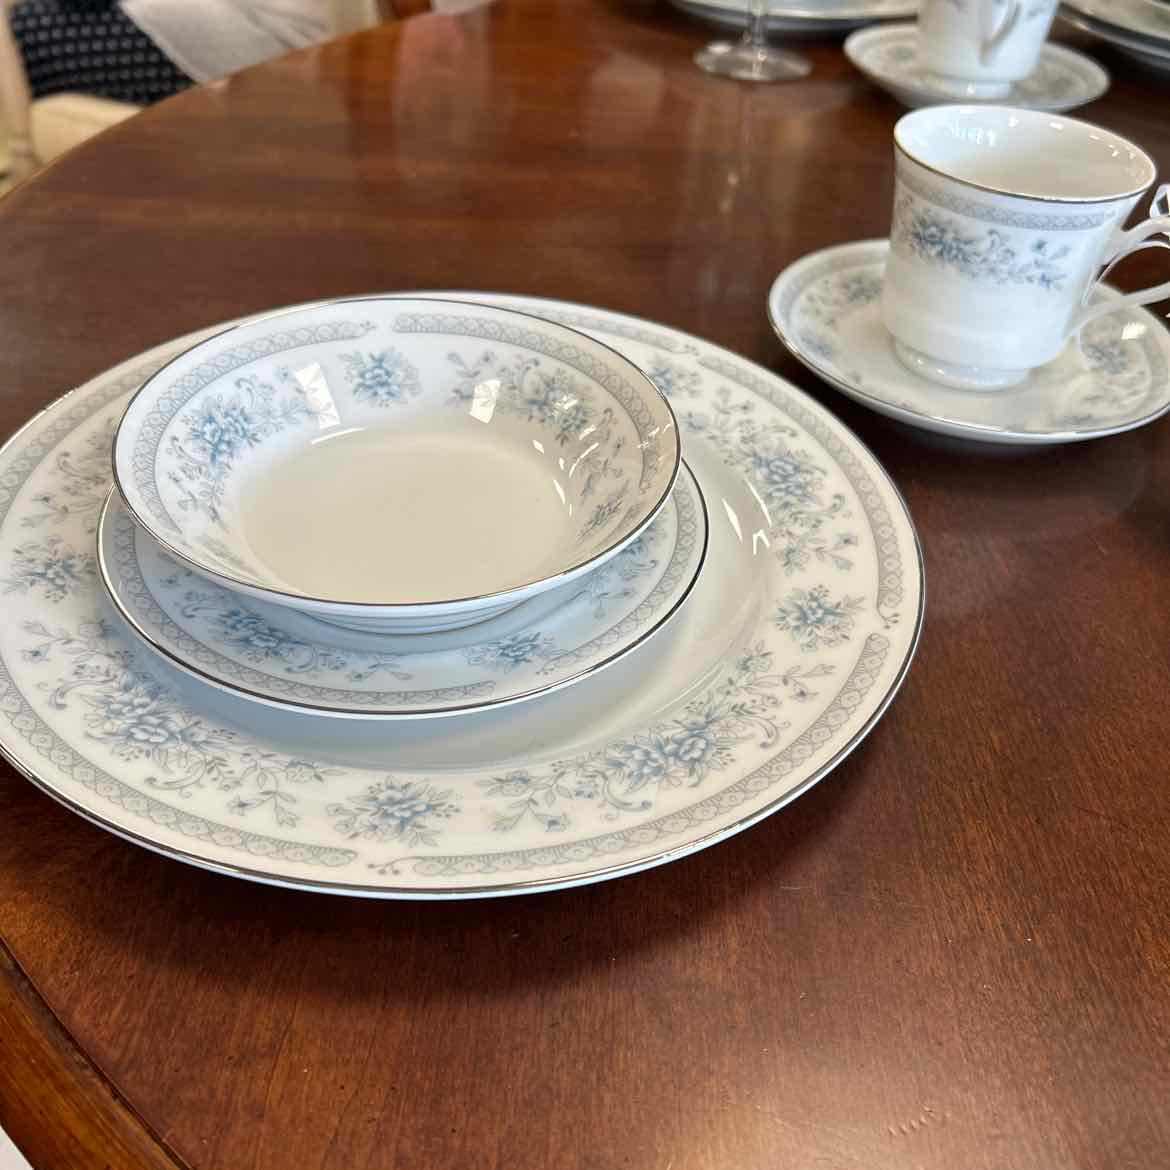 30 pc Blue Floral China American Limoges